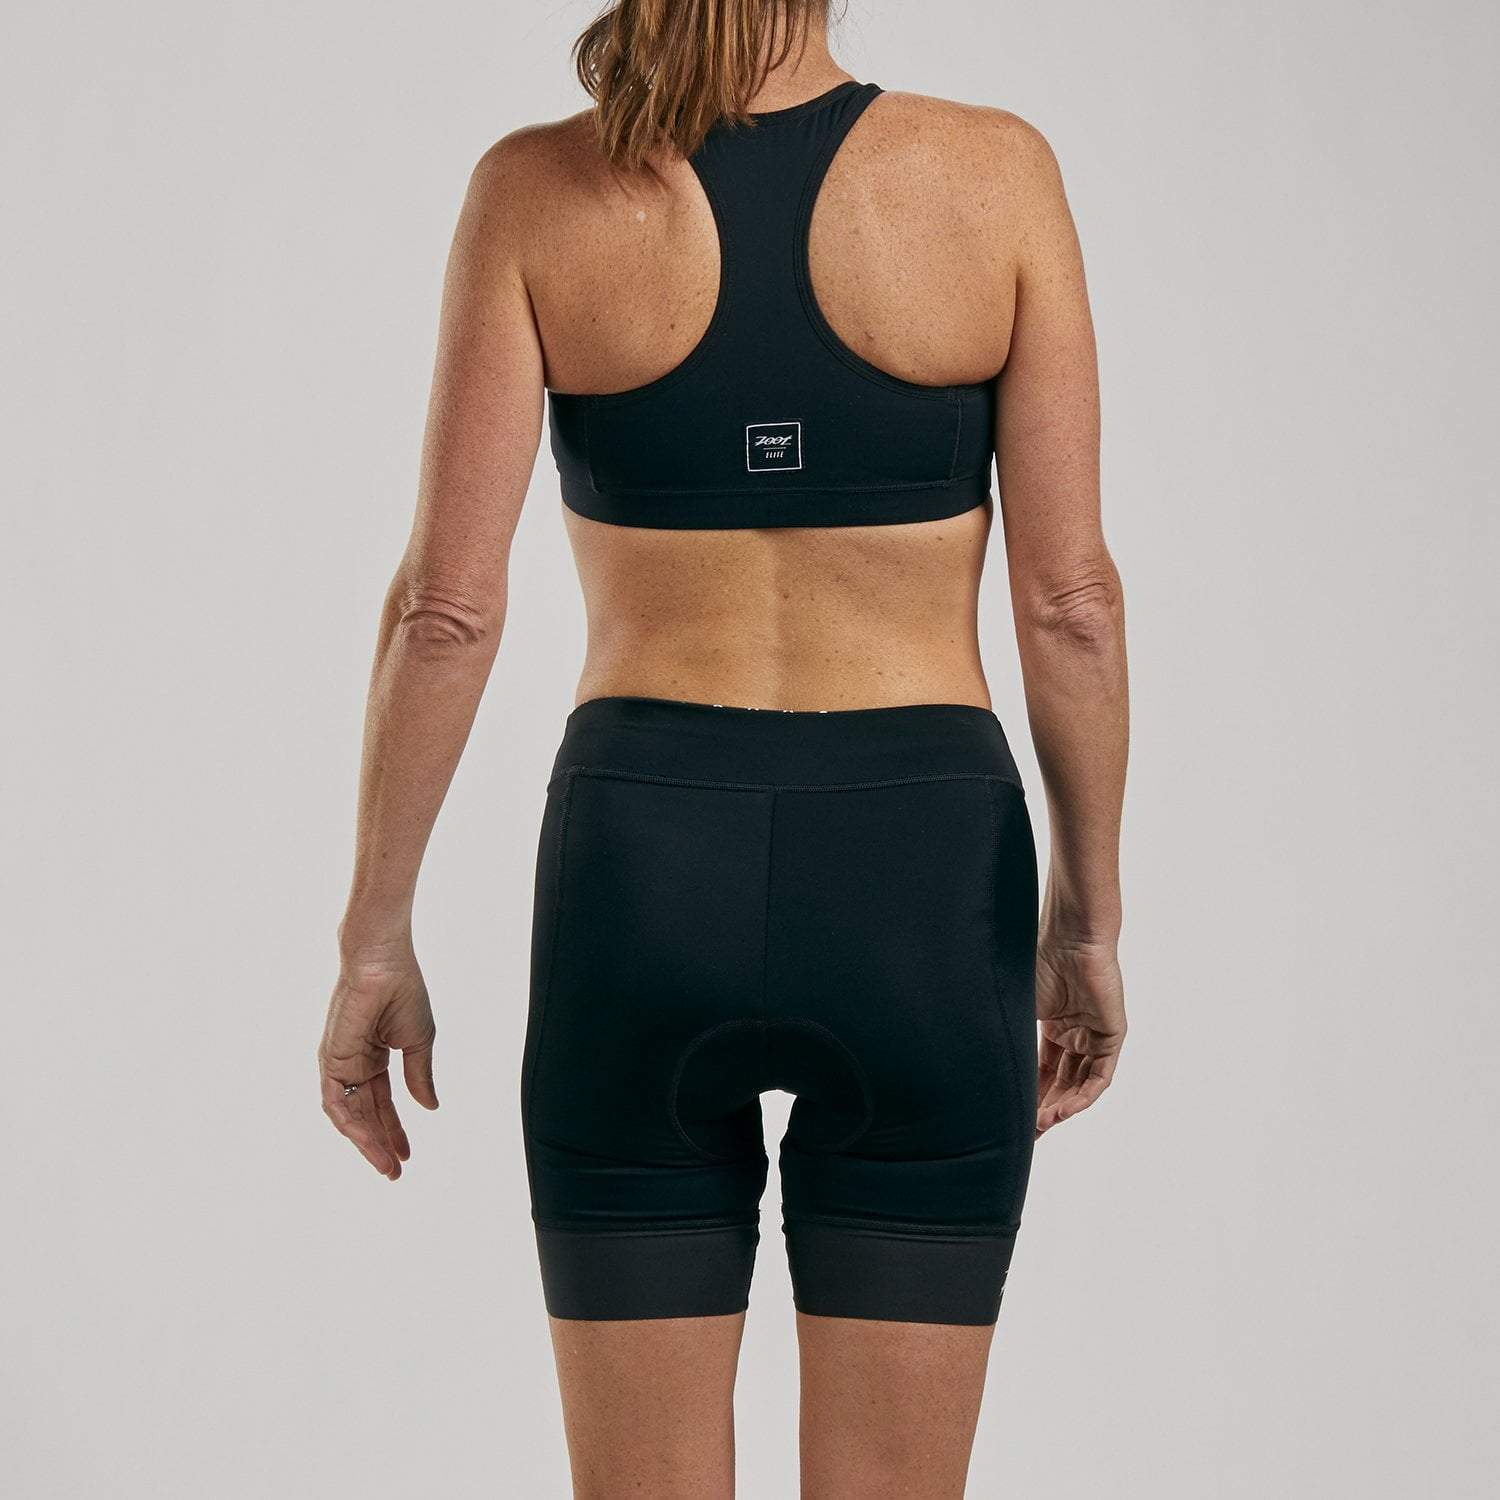 Zoot Sports Cycle Apparel Womens Core + Cycle Short - Black